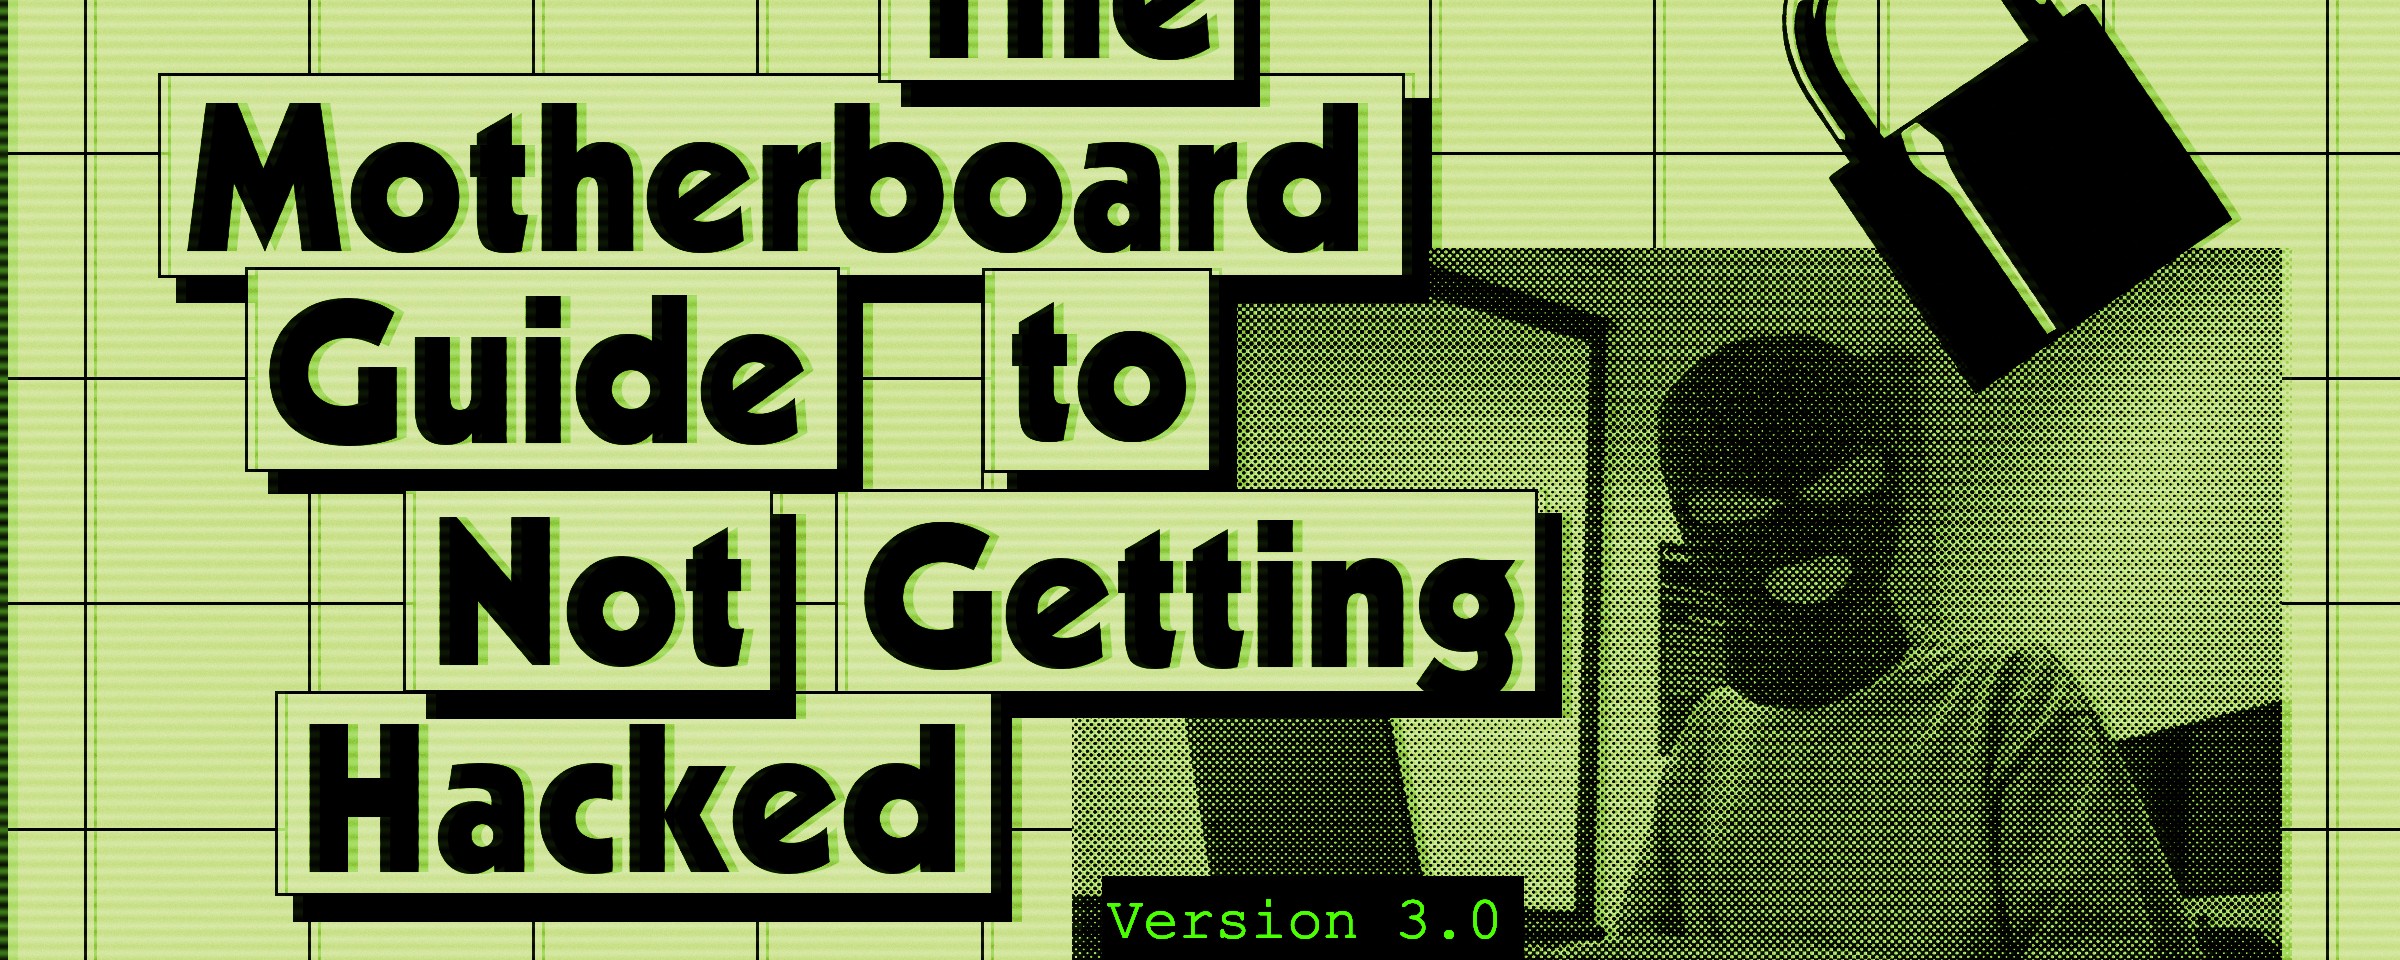 The Motherboard Guide To Not Getting Hacked